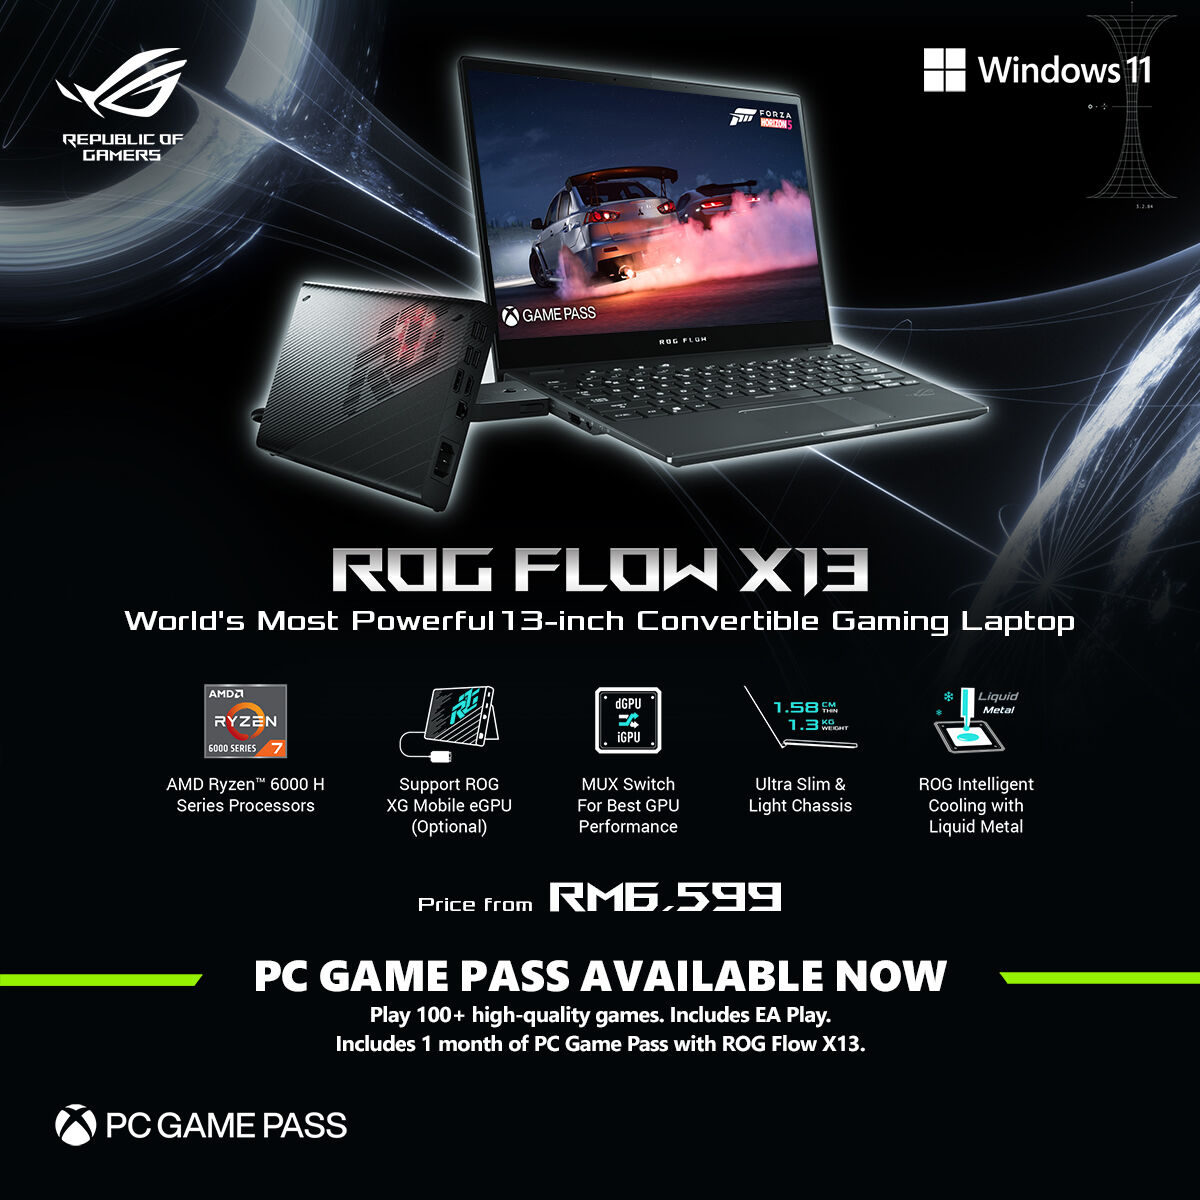 ASUS ROG Launches the ROG Flow X13 Laptop